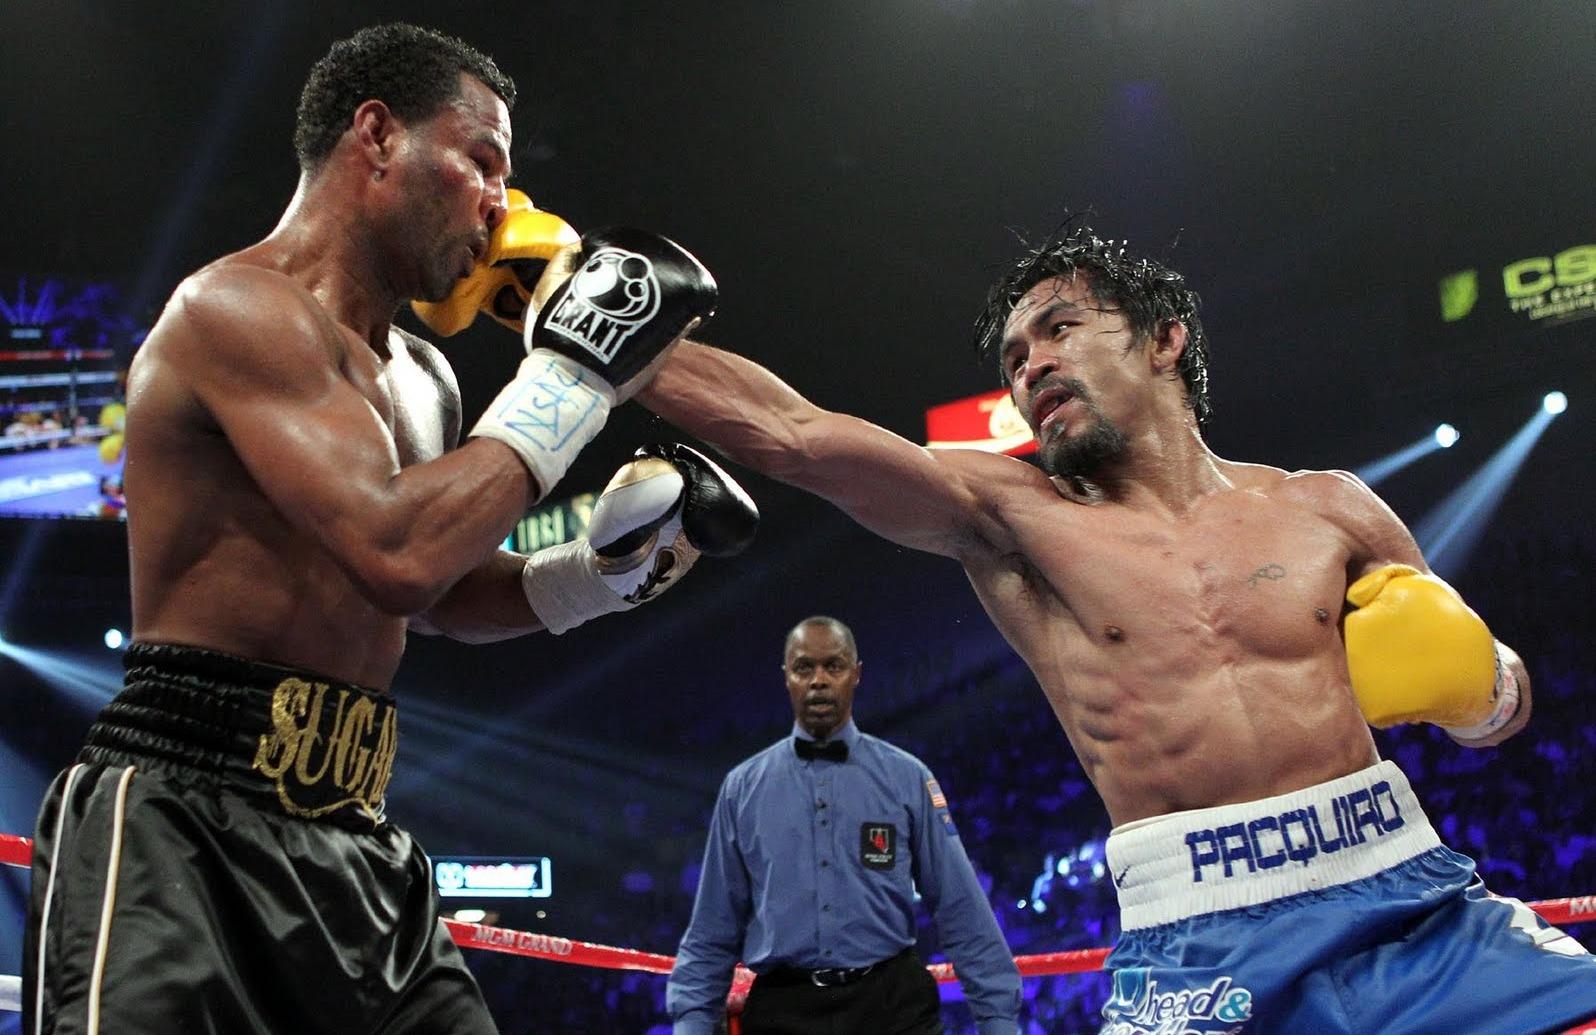 Manny Pacquiao Wallpaper High Quality